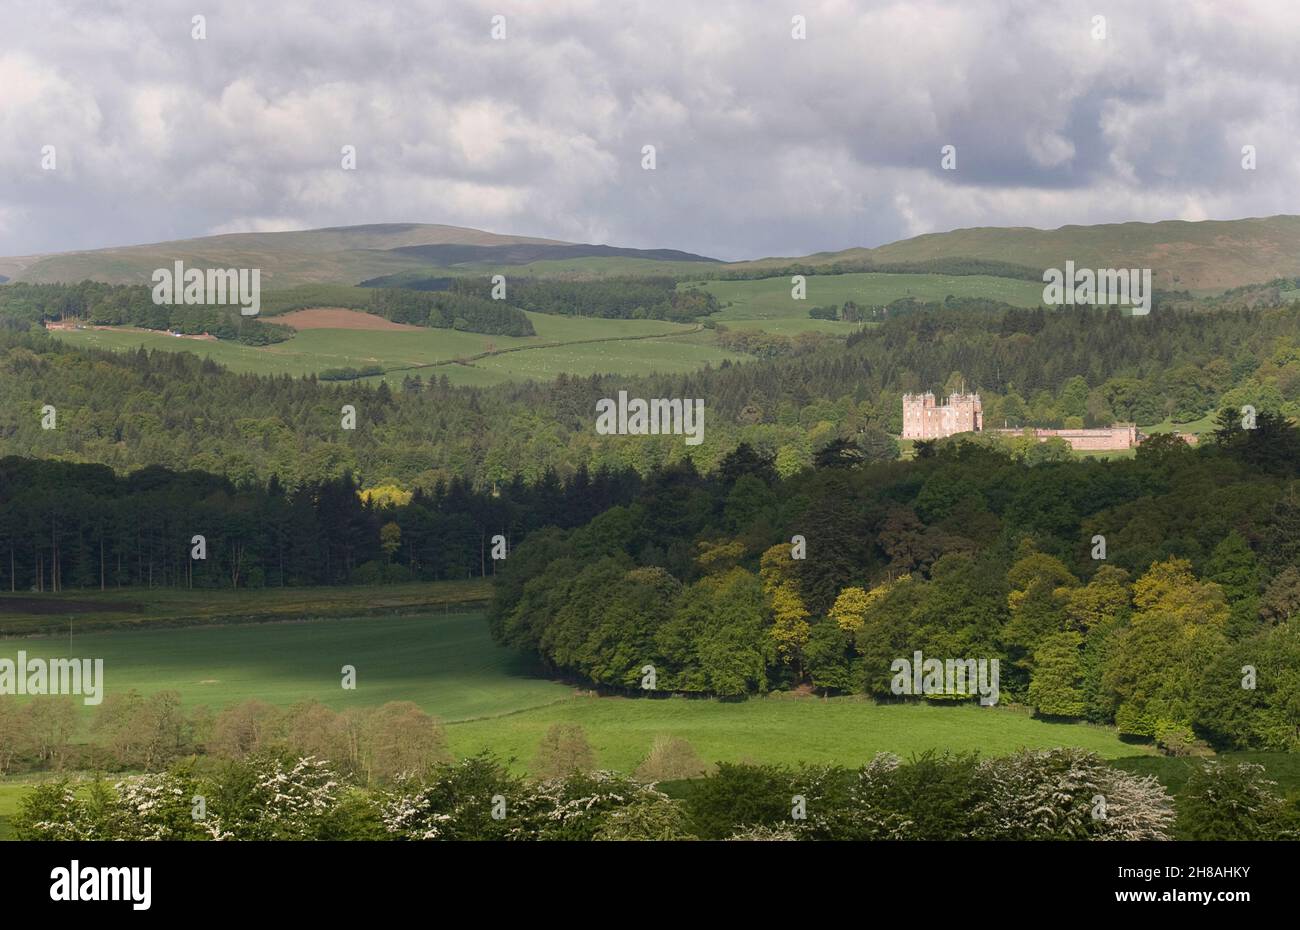 Drumlanrig Castle home to the Duke and Duchess of Buccleuch & Queensberry, Queensbury estate, Dumfries & Galloway, Dumfriesshire, Scotland Stock Photo